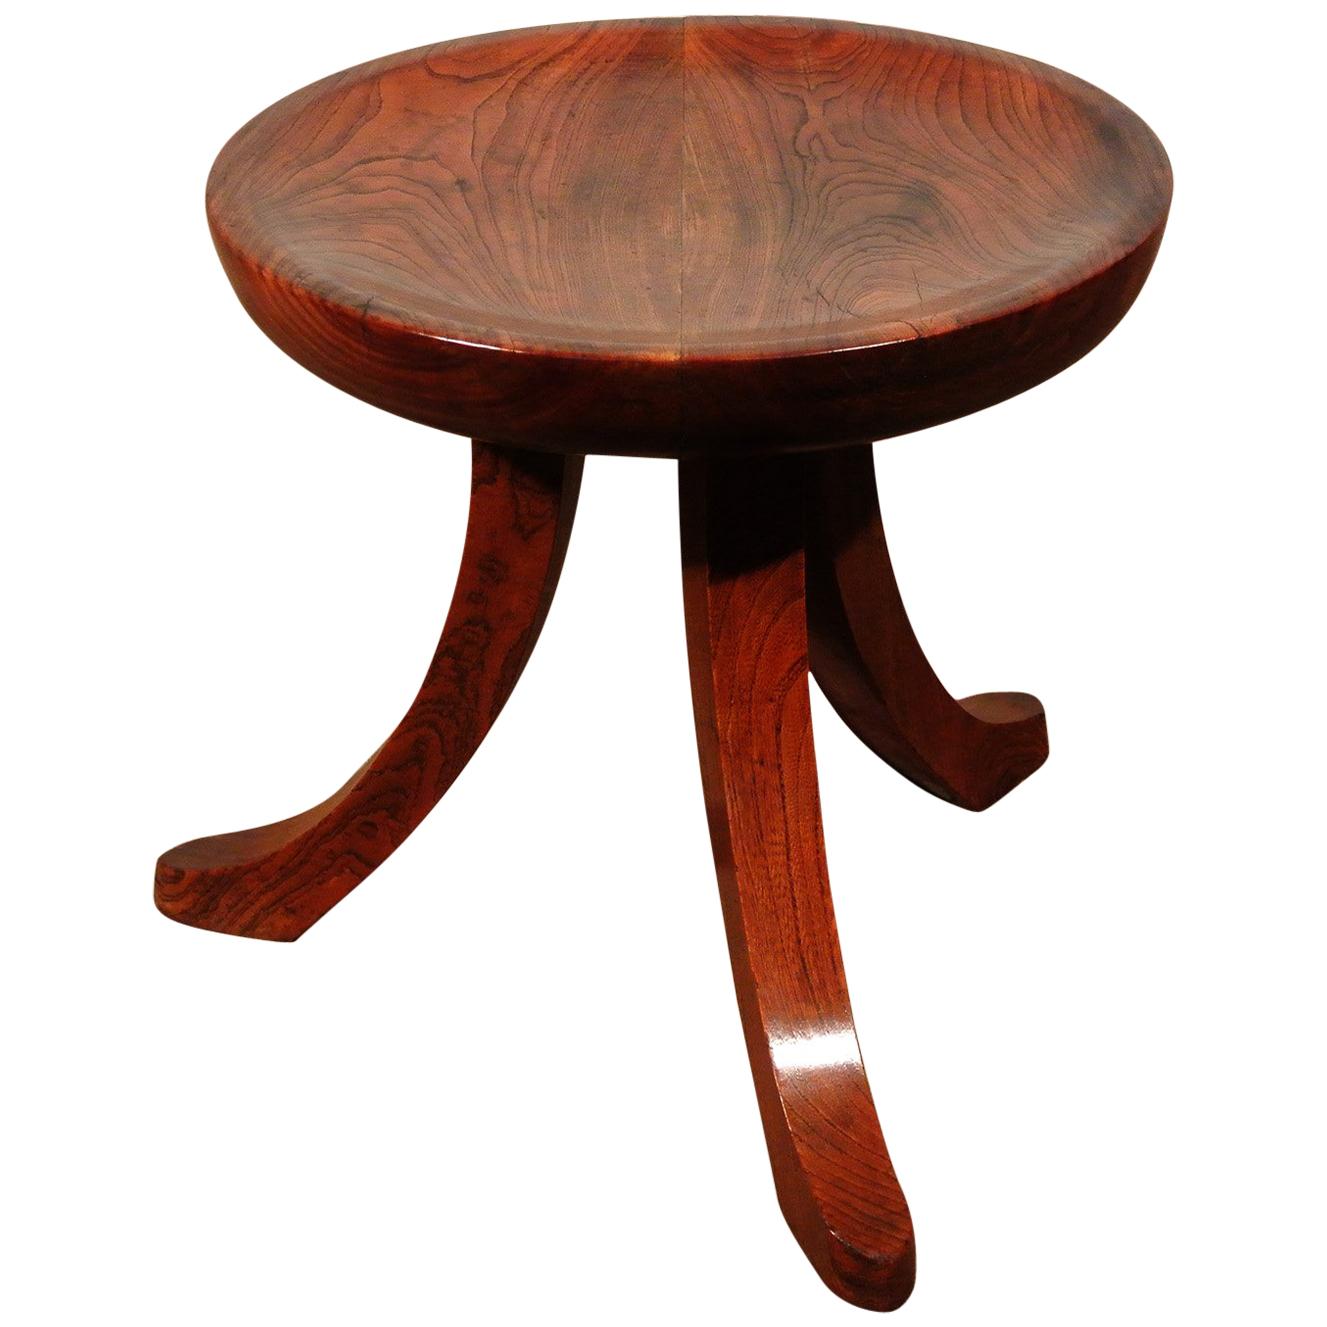 Unusual 'Liberty Thebes' Design Round Stool in Solid Walnut, circa 1900 For Sale